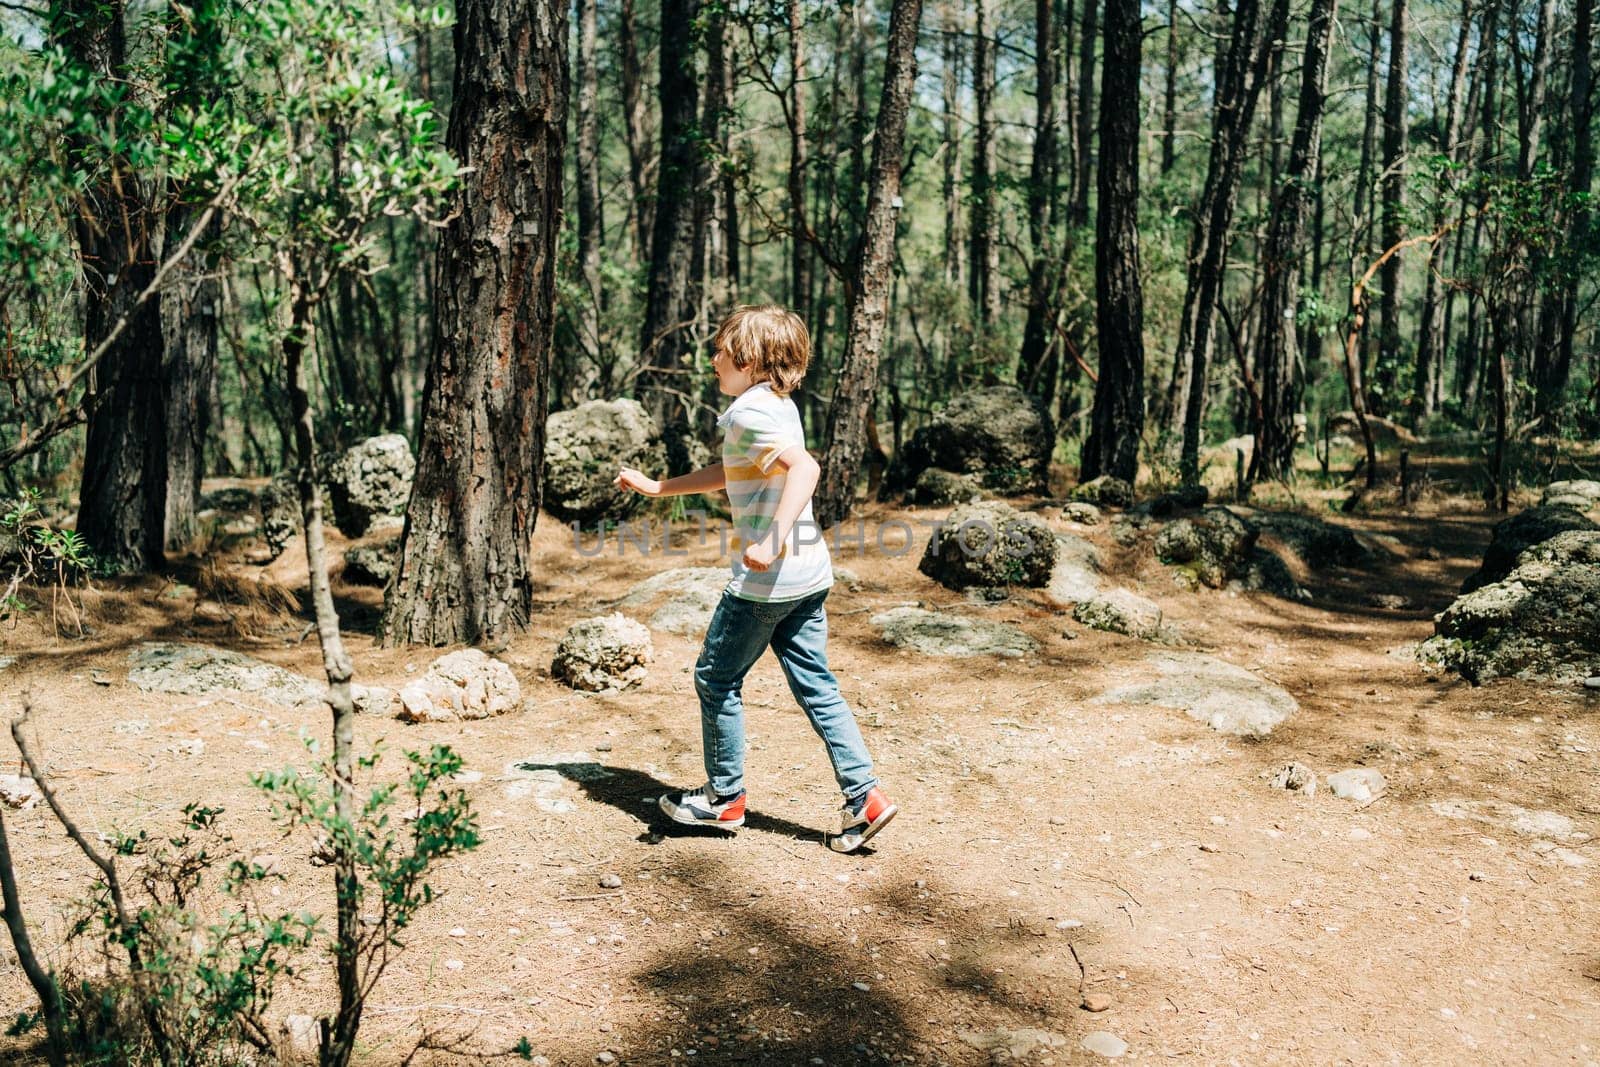 Tourist school boy kid child in a casual clothing walking in the summer greenwood leaf forest with rocky boulders stones all around the place. by Ostanina